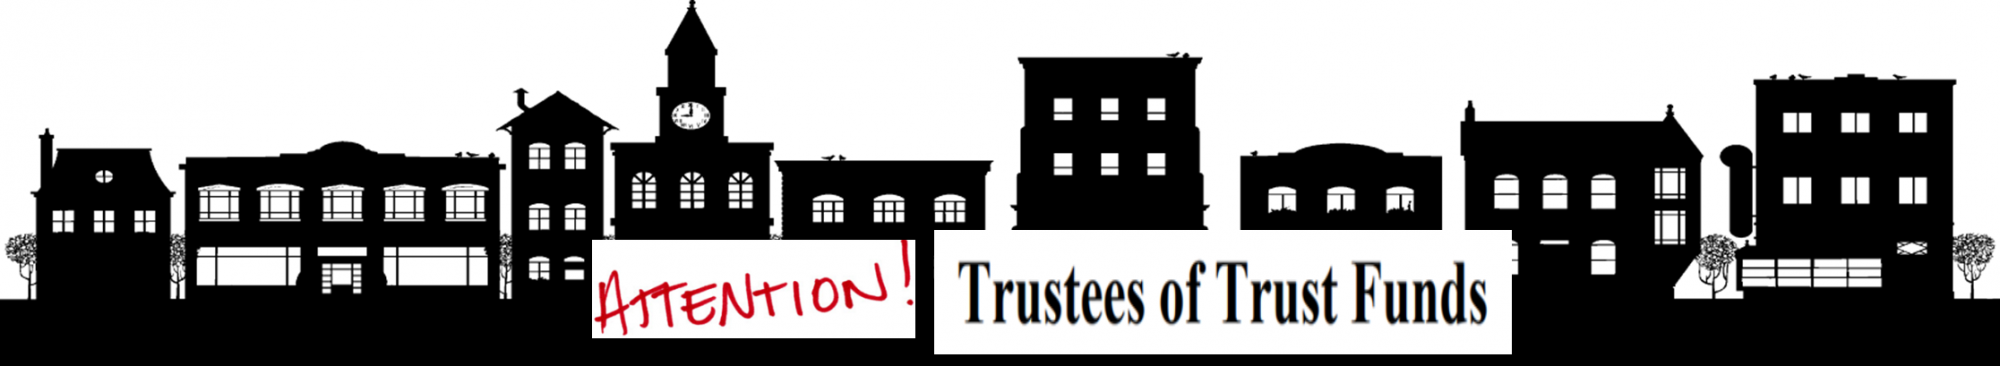 trustees attention